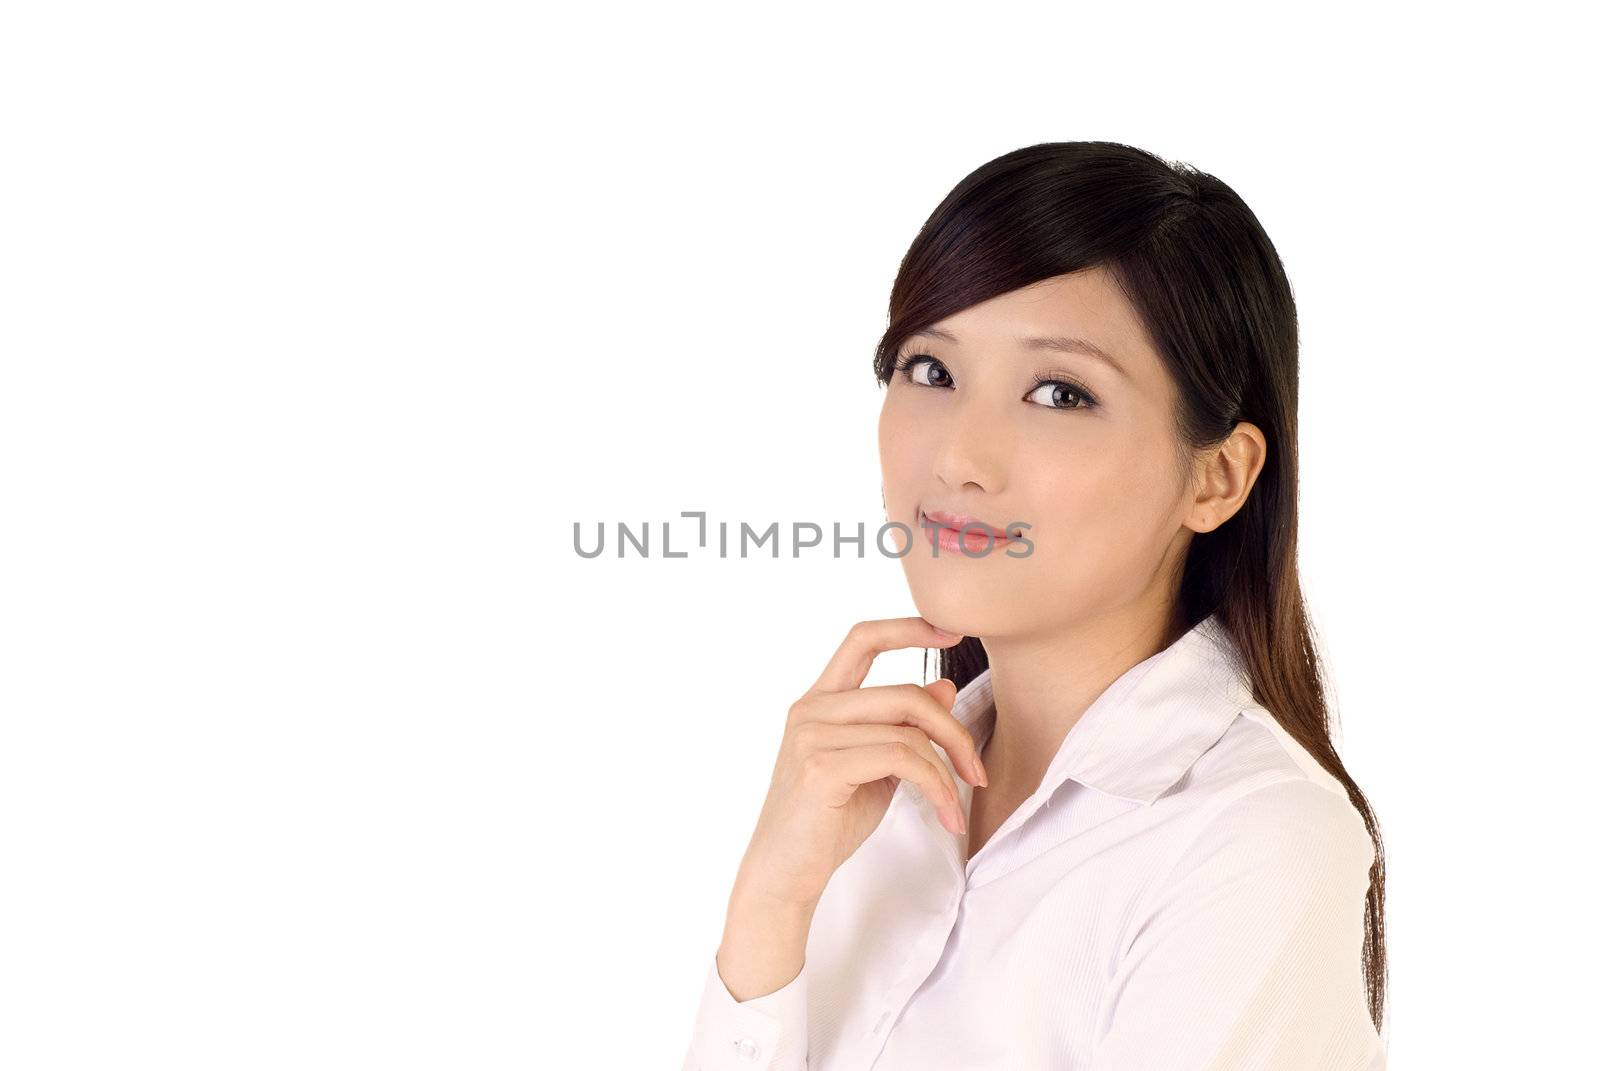 Cheerful business woman portrait of Asian on white background.